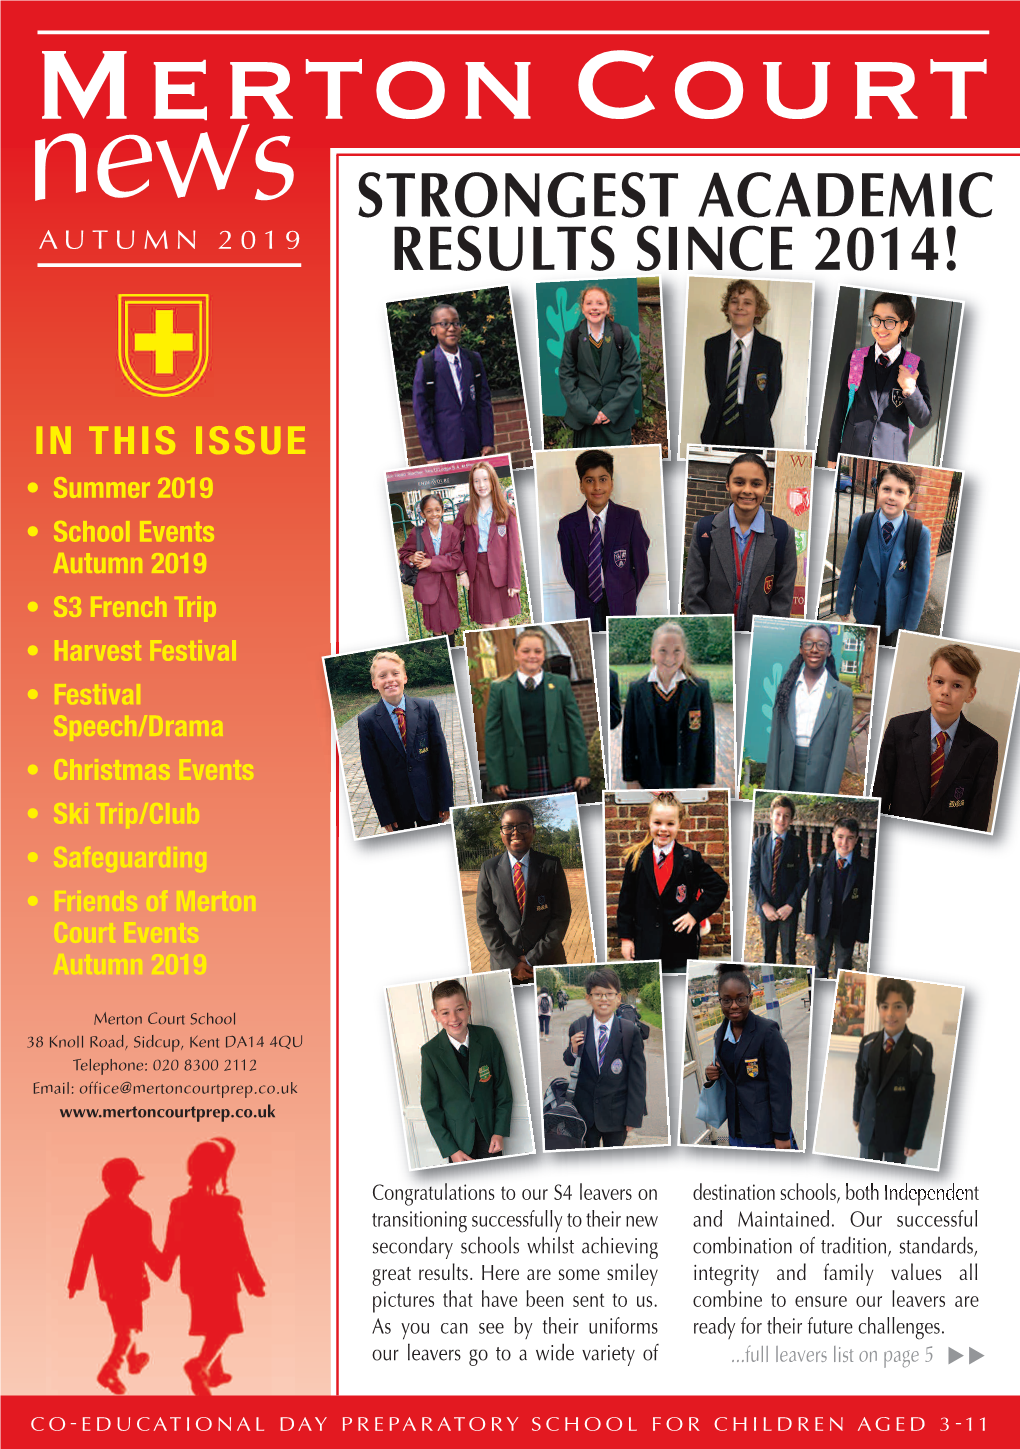 News Autumn 19 F Cover Final:Layout 1 30/9/19 18:01 Page 1 Merton Court News STRONGESTACADEMIC a U T U M N 2 0 1 9 RESULTS SINCE 2014!